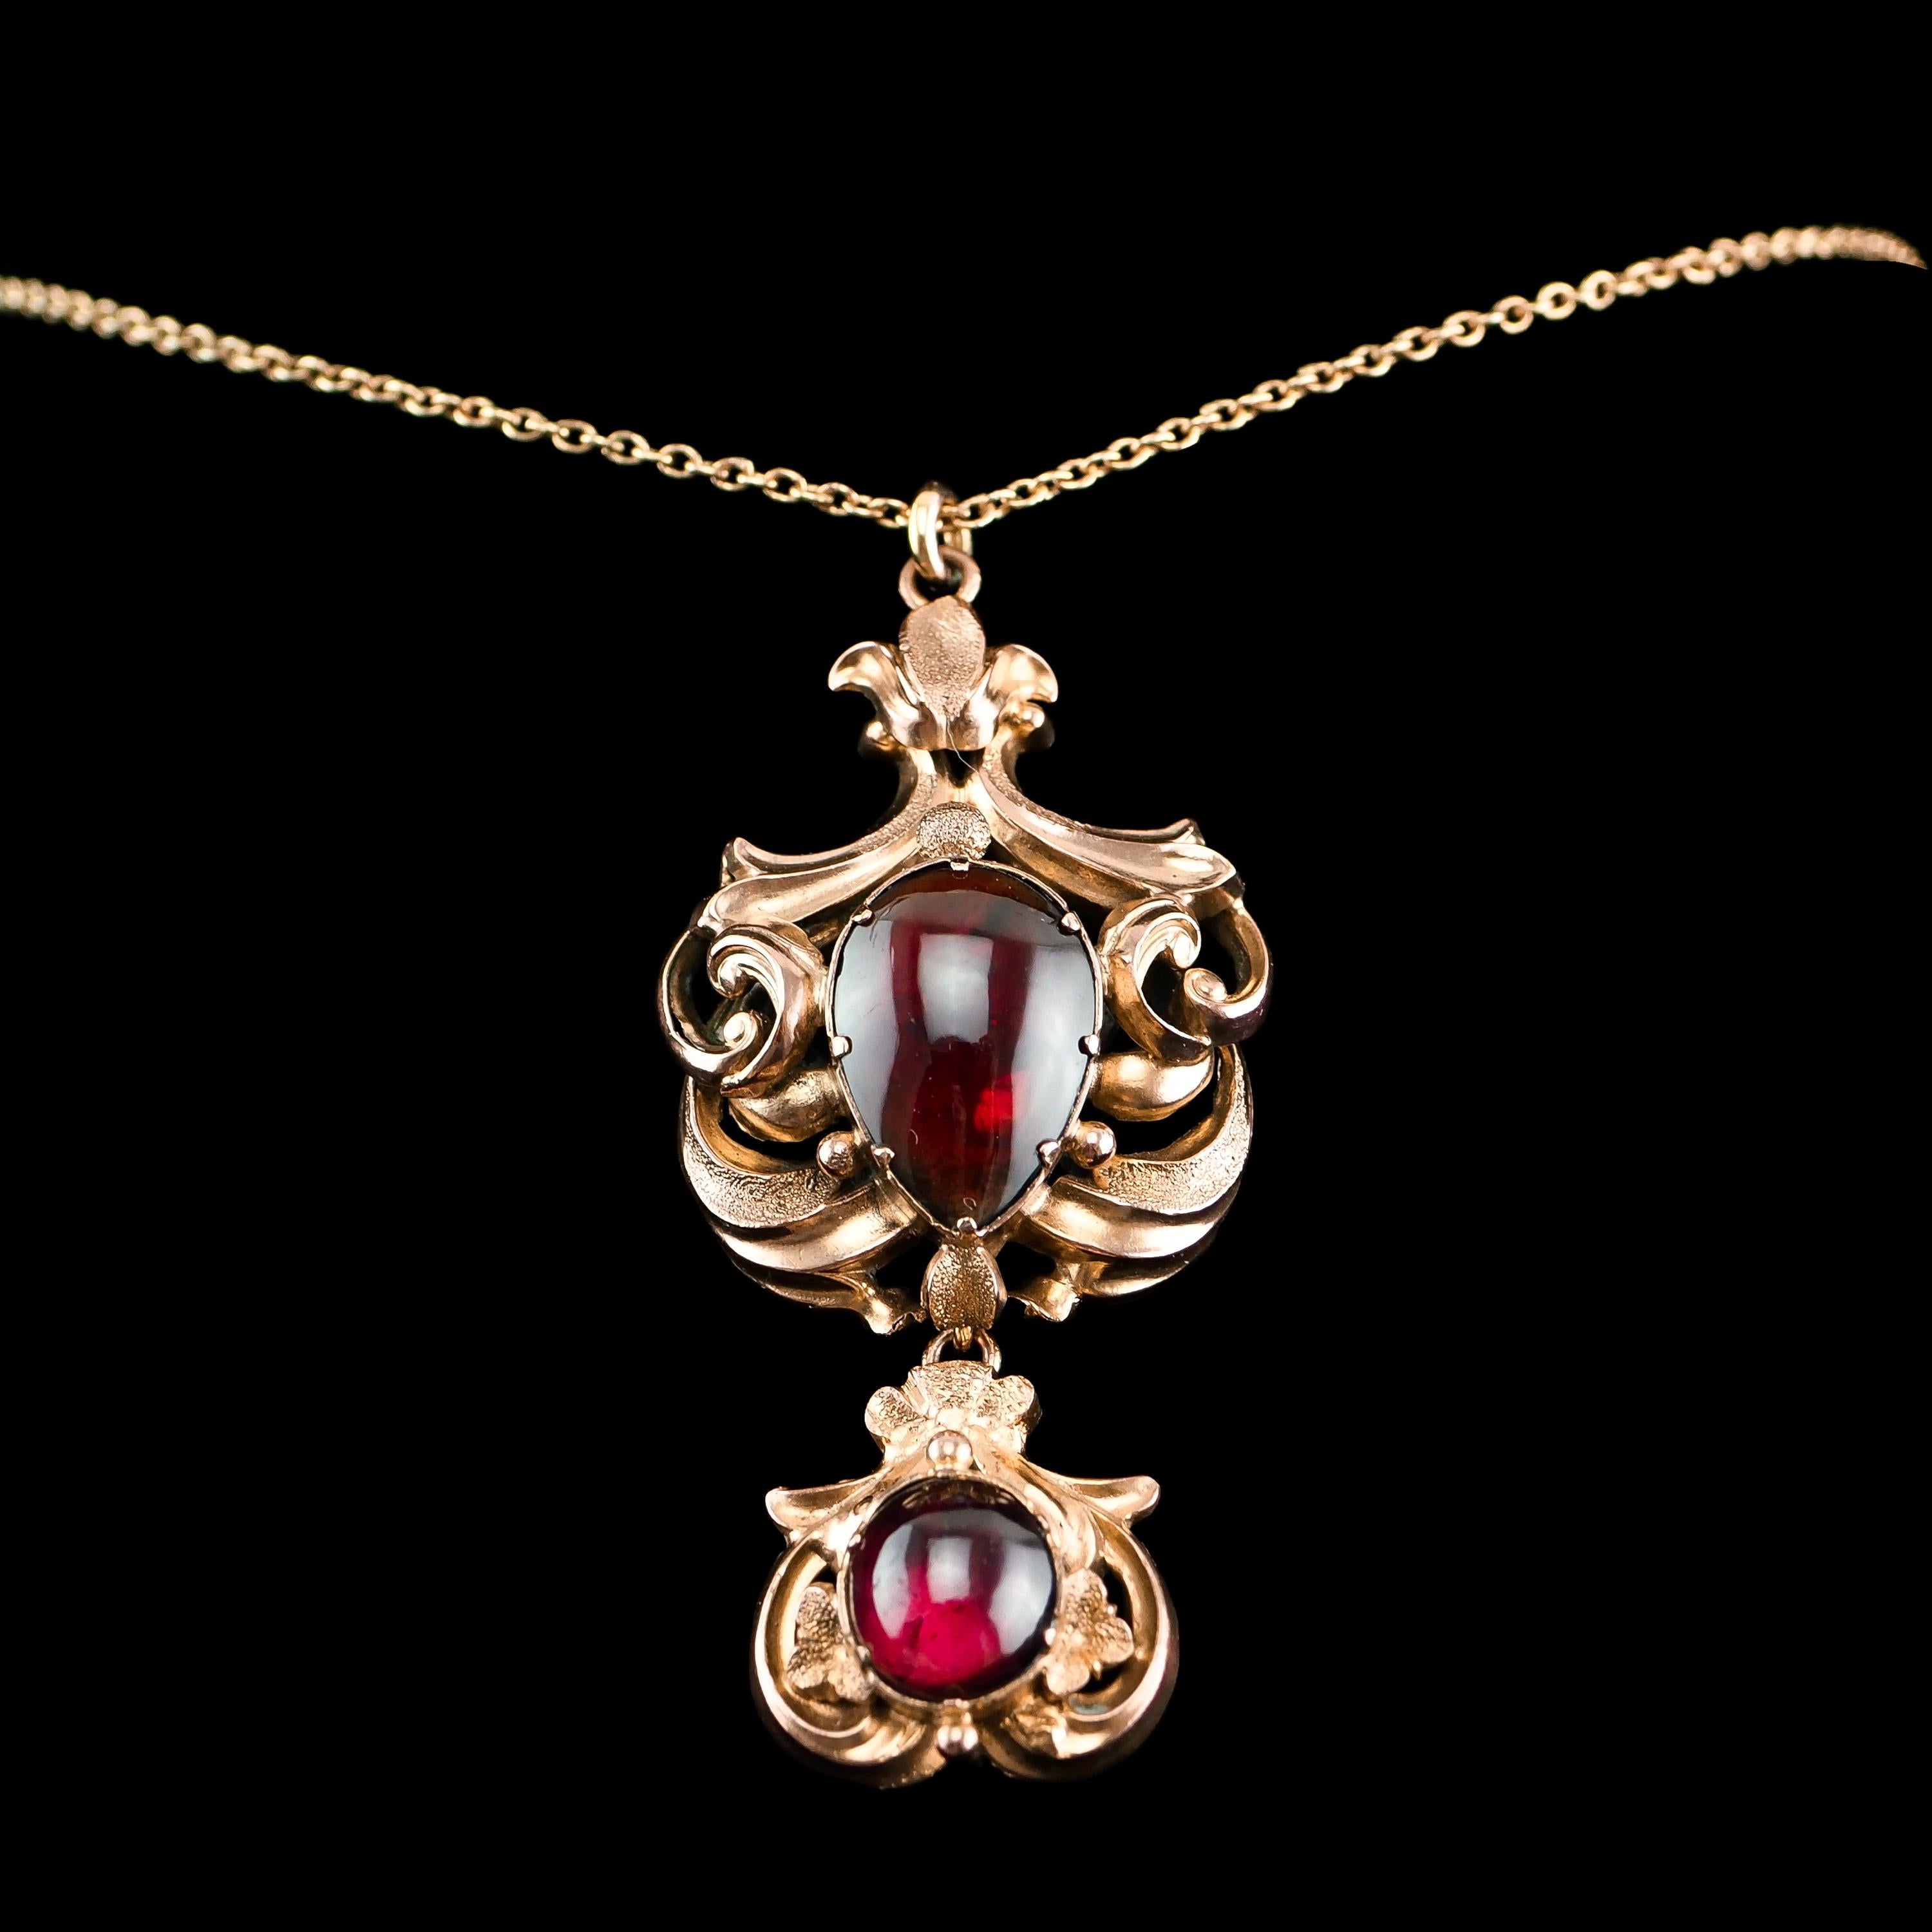 We are delighted to offer this magnificent 18k gold garnet necklace made in the early Victorian period c.1840.

The necklace is made from high-carat gold (18K+ tested) and presents an exceptional ornate and regal design featuring multiple layers of